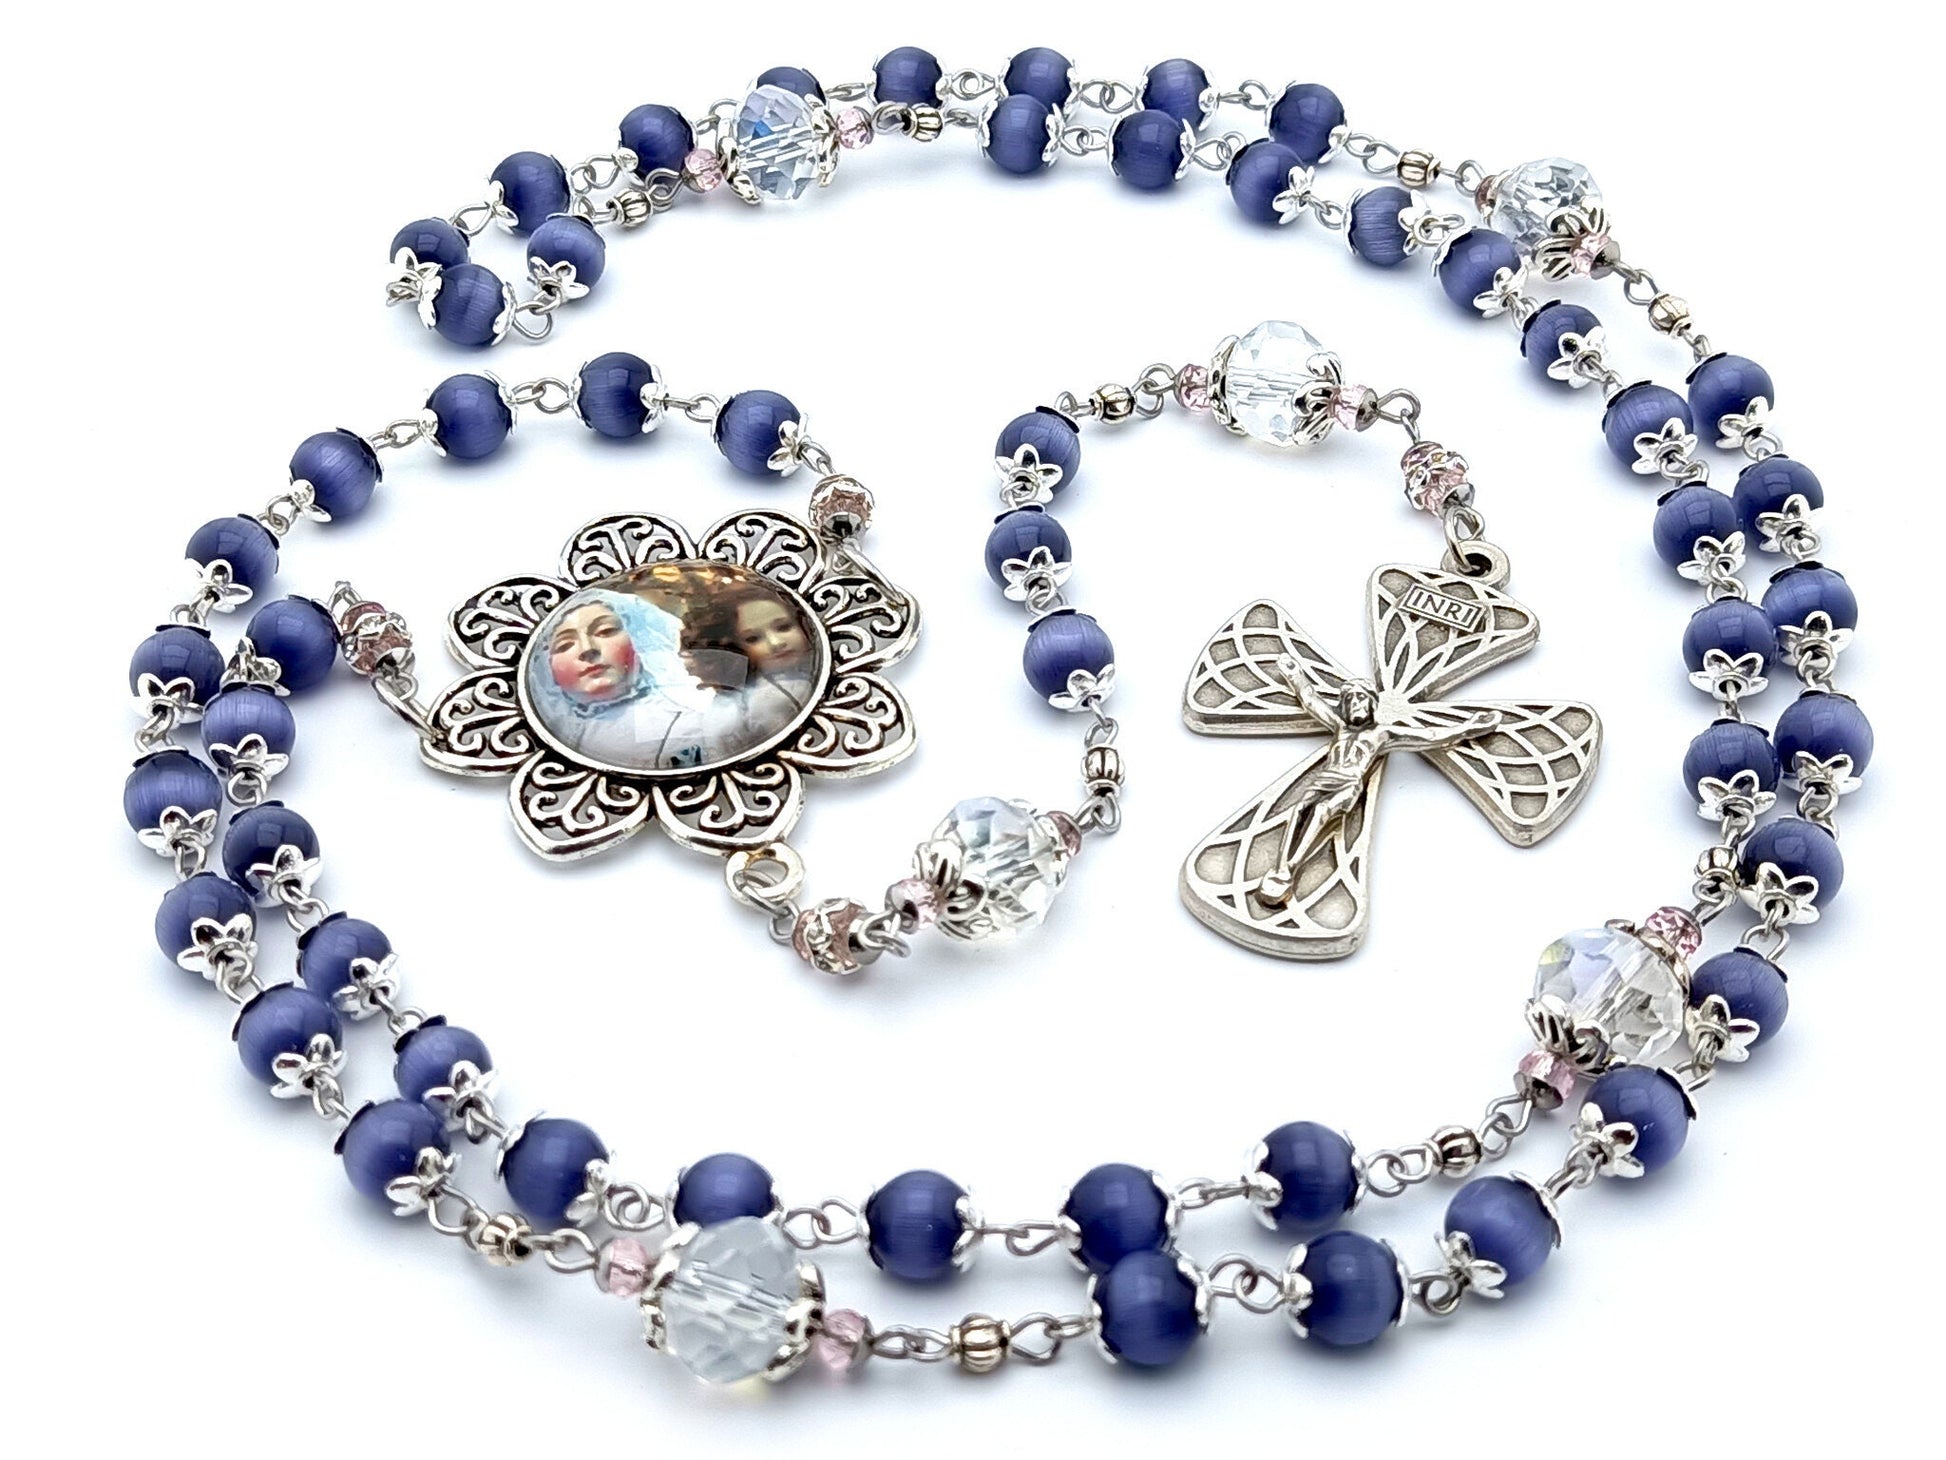 Our Lady of Good Success unique rosary beads with purple tigers eye and clear glass beads, silver harlequin crucifix and picture centre medal.